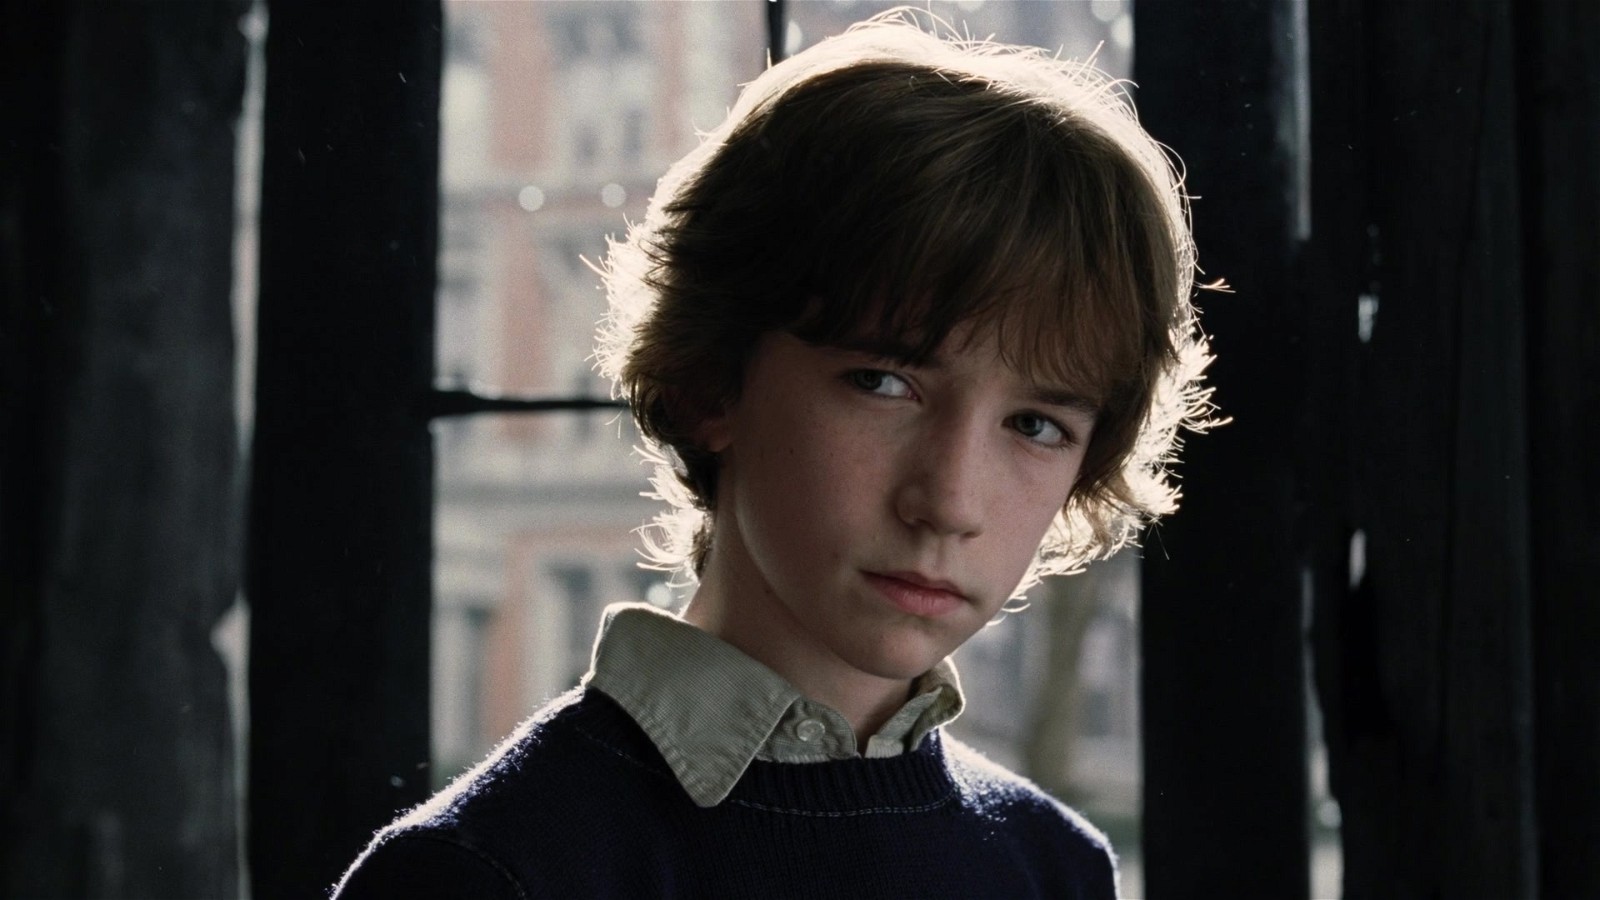 Liam Aiken in a still from A Series of Unfortunate Events.